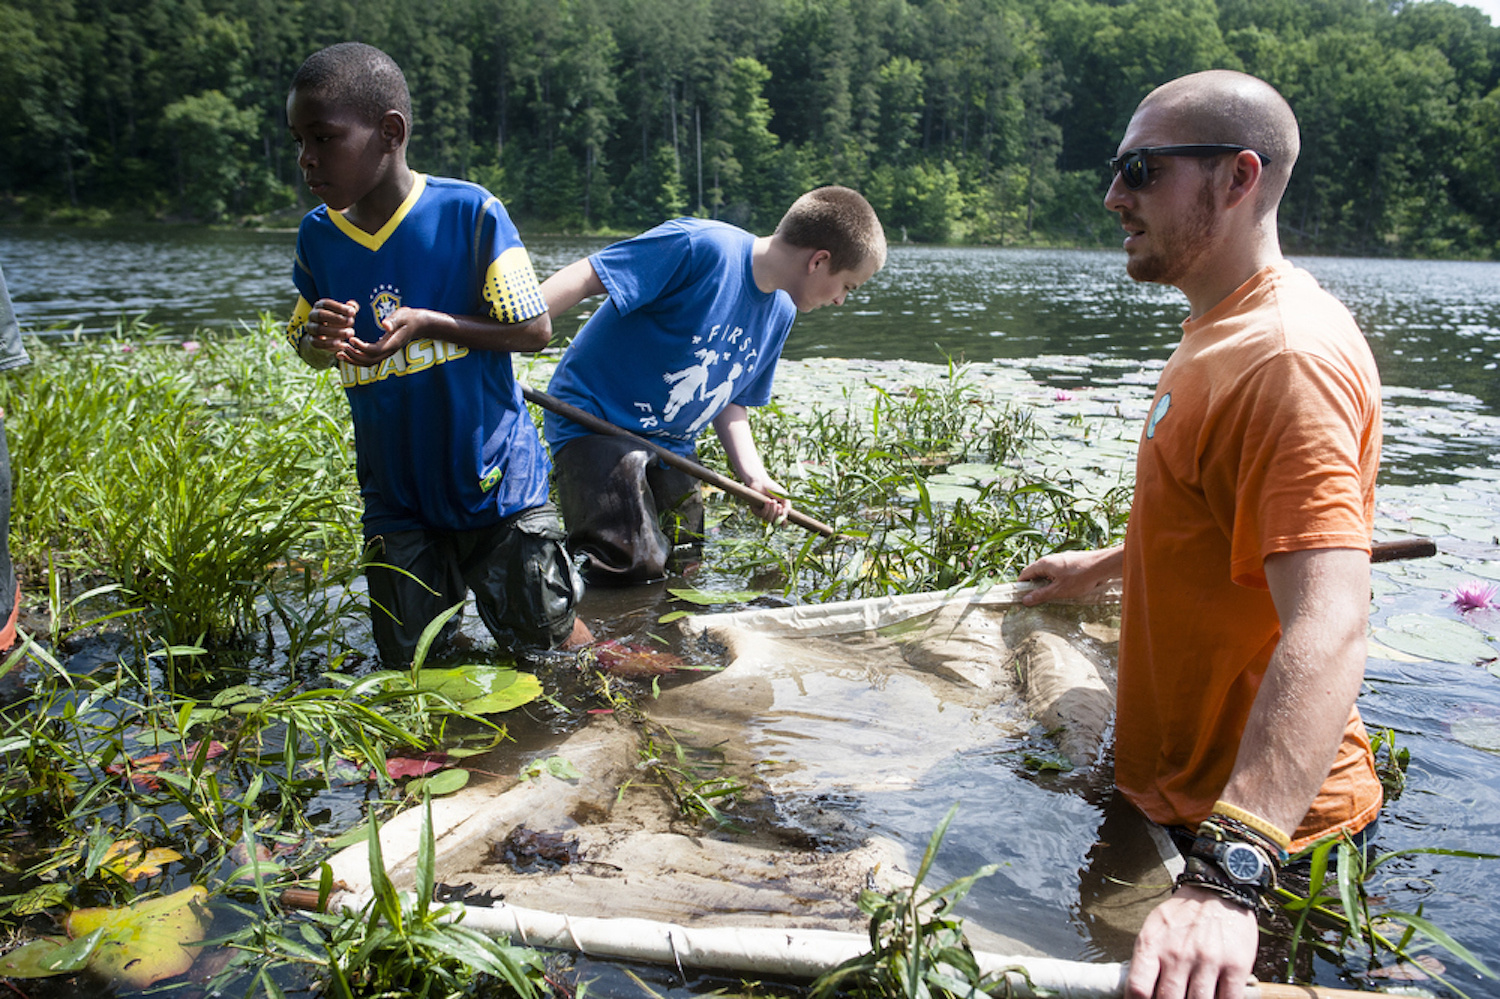 Brien Vincent. 6/18/2014. Rural Action Watershed Restoration AmeriCorps member Rand Romas leads a pond study as part of the KEEN summer camp at Lake Hope State Park near McArthur in Vinton County, Ohio.